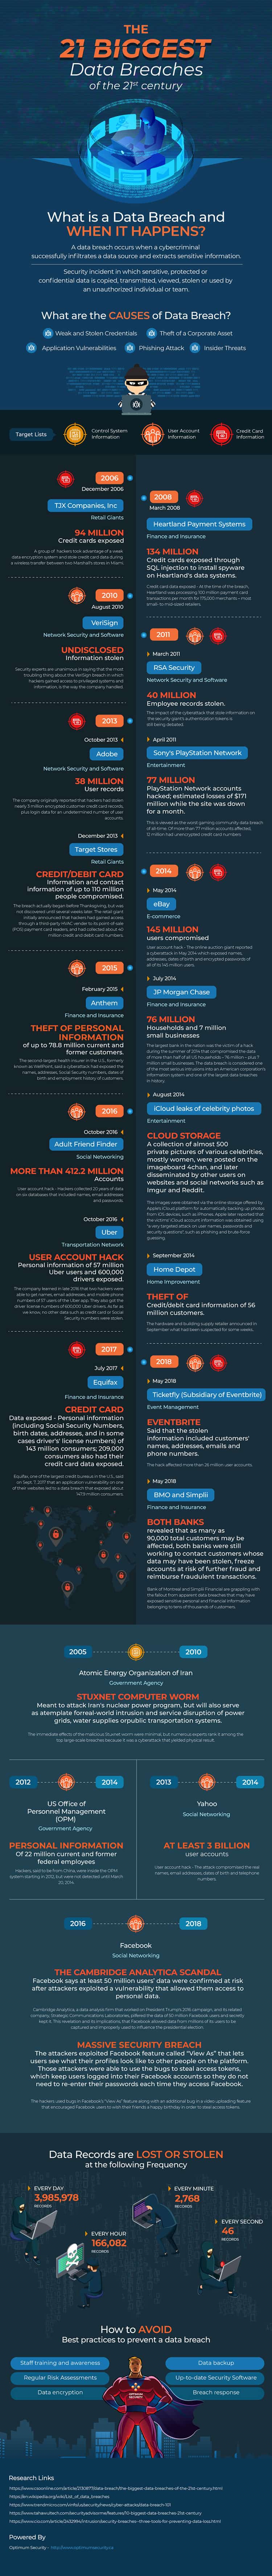 The 21 Biggest Data Breaches of the 21st Century (infographic)